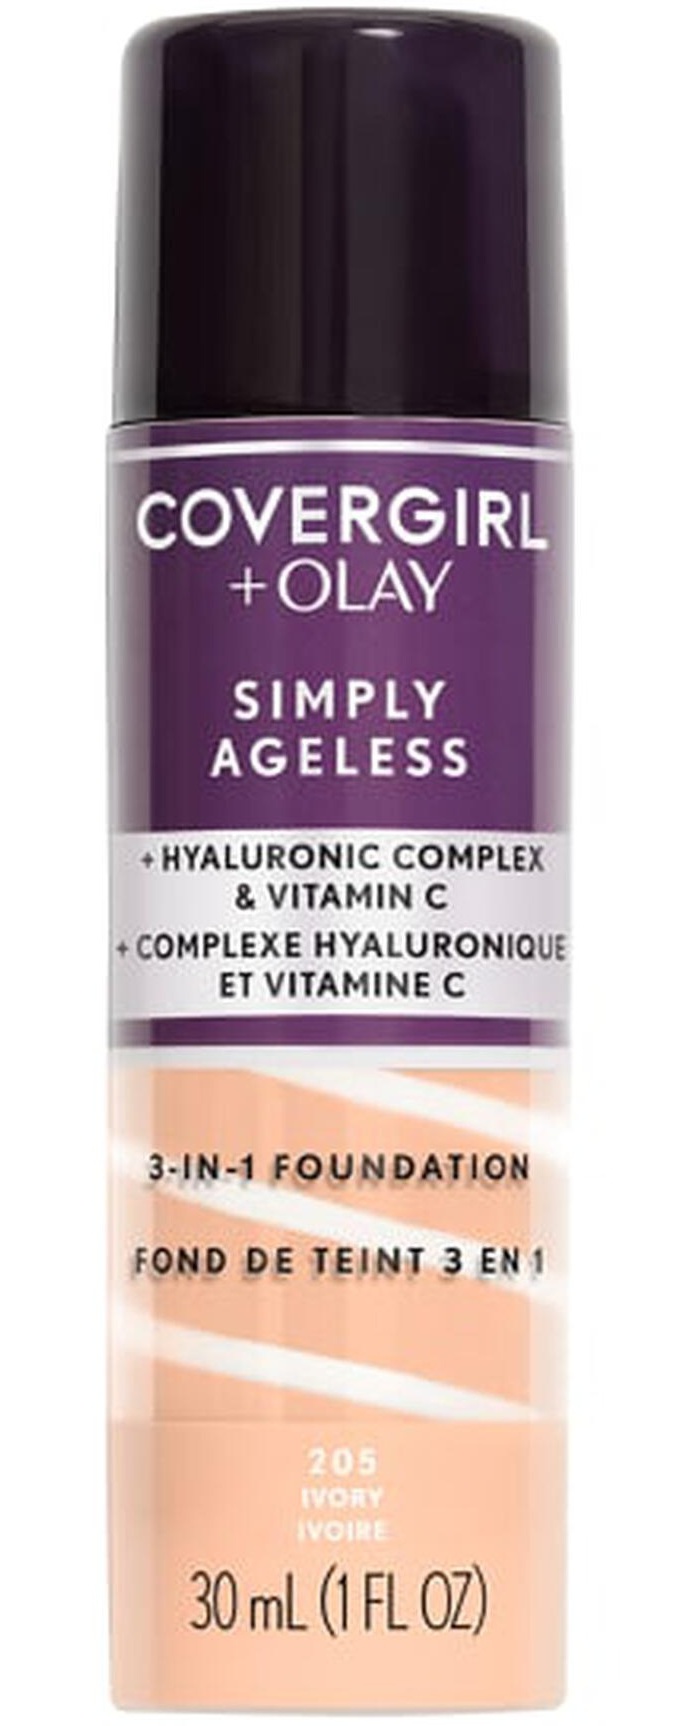 Covergirl + Olay Simply Ageless + Hyaluronic Complex + Vitamin C 3 In 1 Foundation